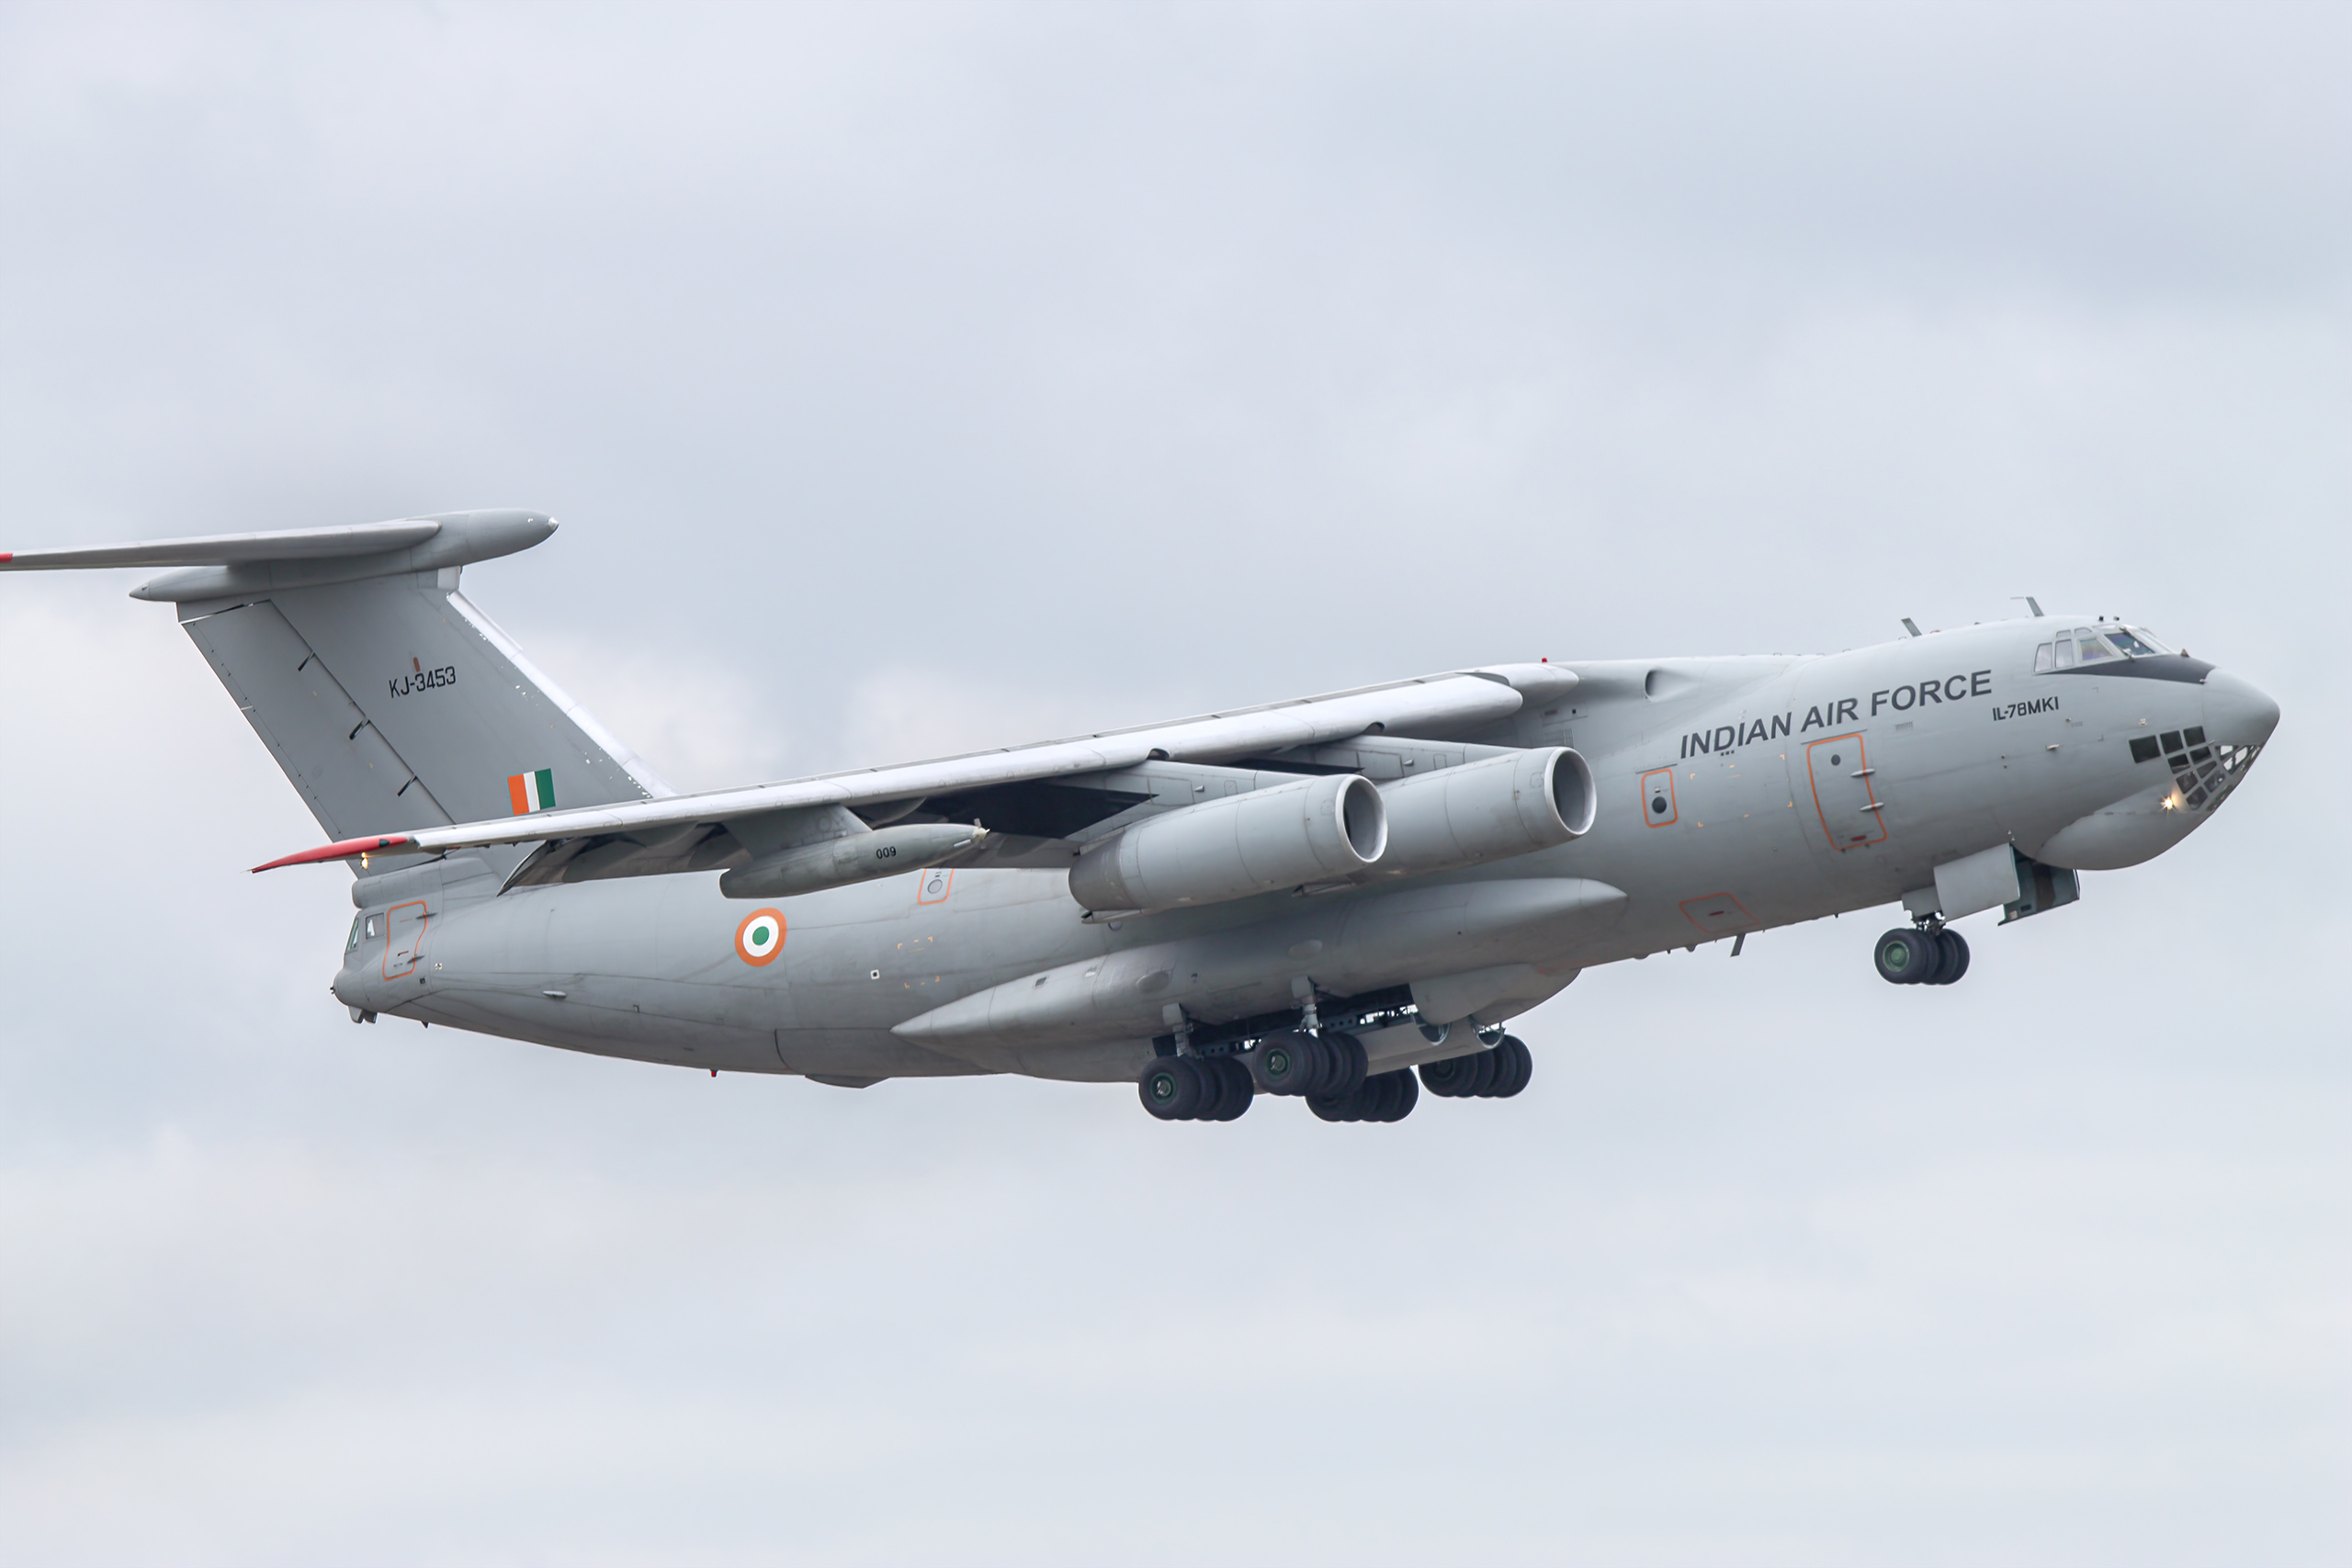 Iljushin IL-78MKI / Indian Air Force - © by Gary Parsons